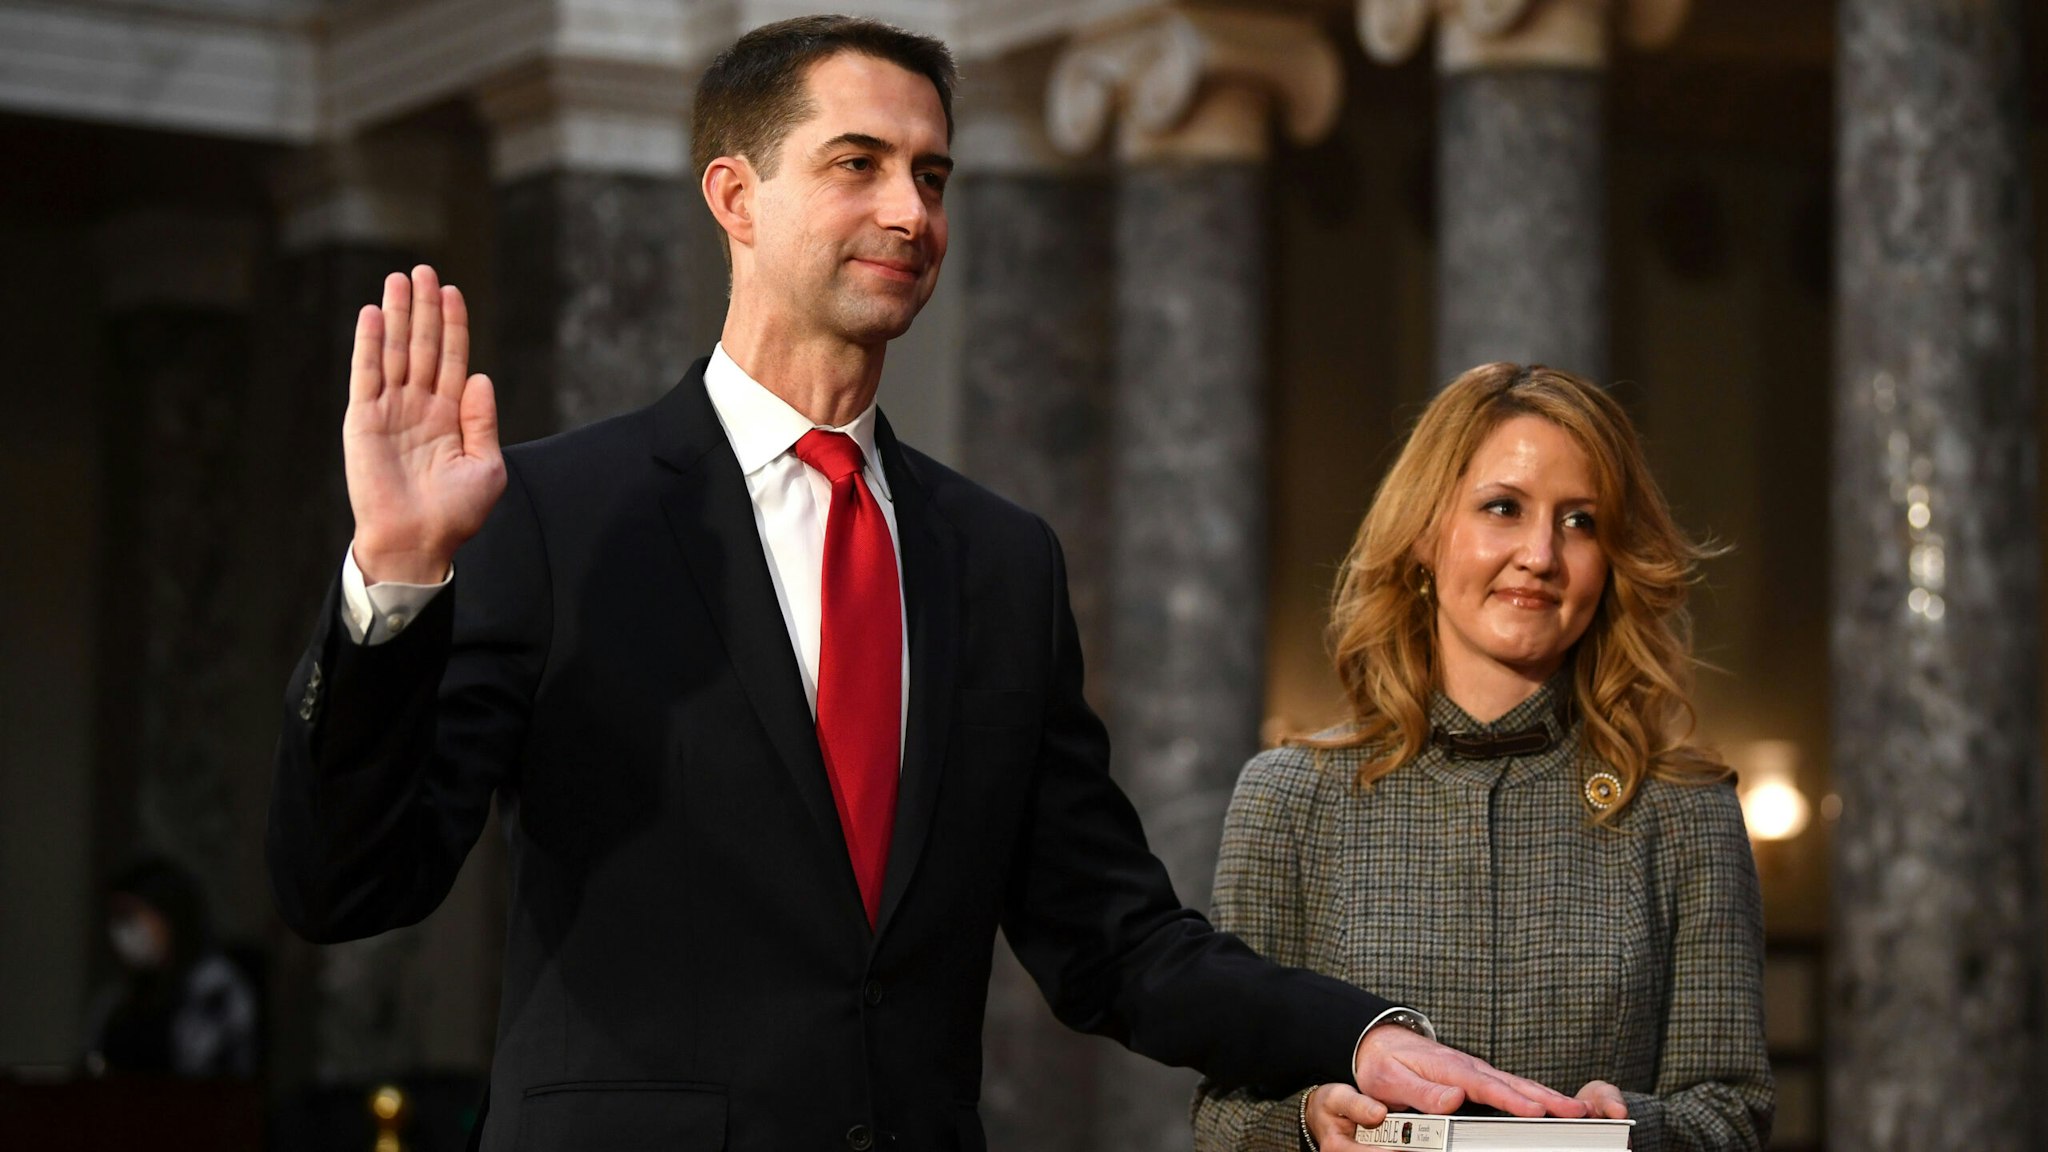 WASHINGTON, DC - JANUARY 3: Sen. Tom Cotton, R-Ark., participates in a mock swearing-in for the 117th Congress with Vice President Mike Pence, as his wife Anna Peckham holds a bible, in the Old Senate Chambers at the U.S. Capitol Building January 3, 2021 in Washington, DC. Both chambers are holding rare Sunday sessions to open the new Congress on January 3 as the Constitution requires.